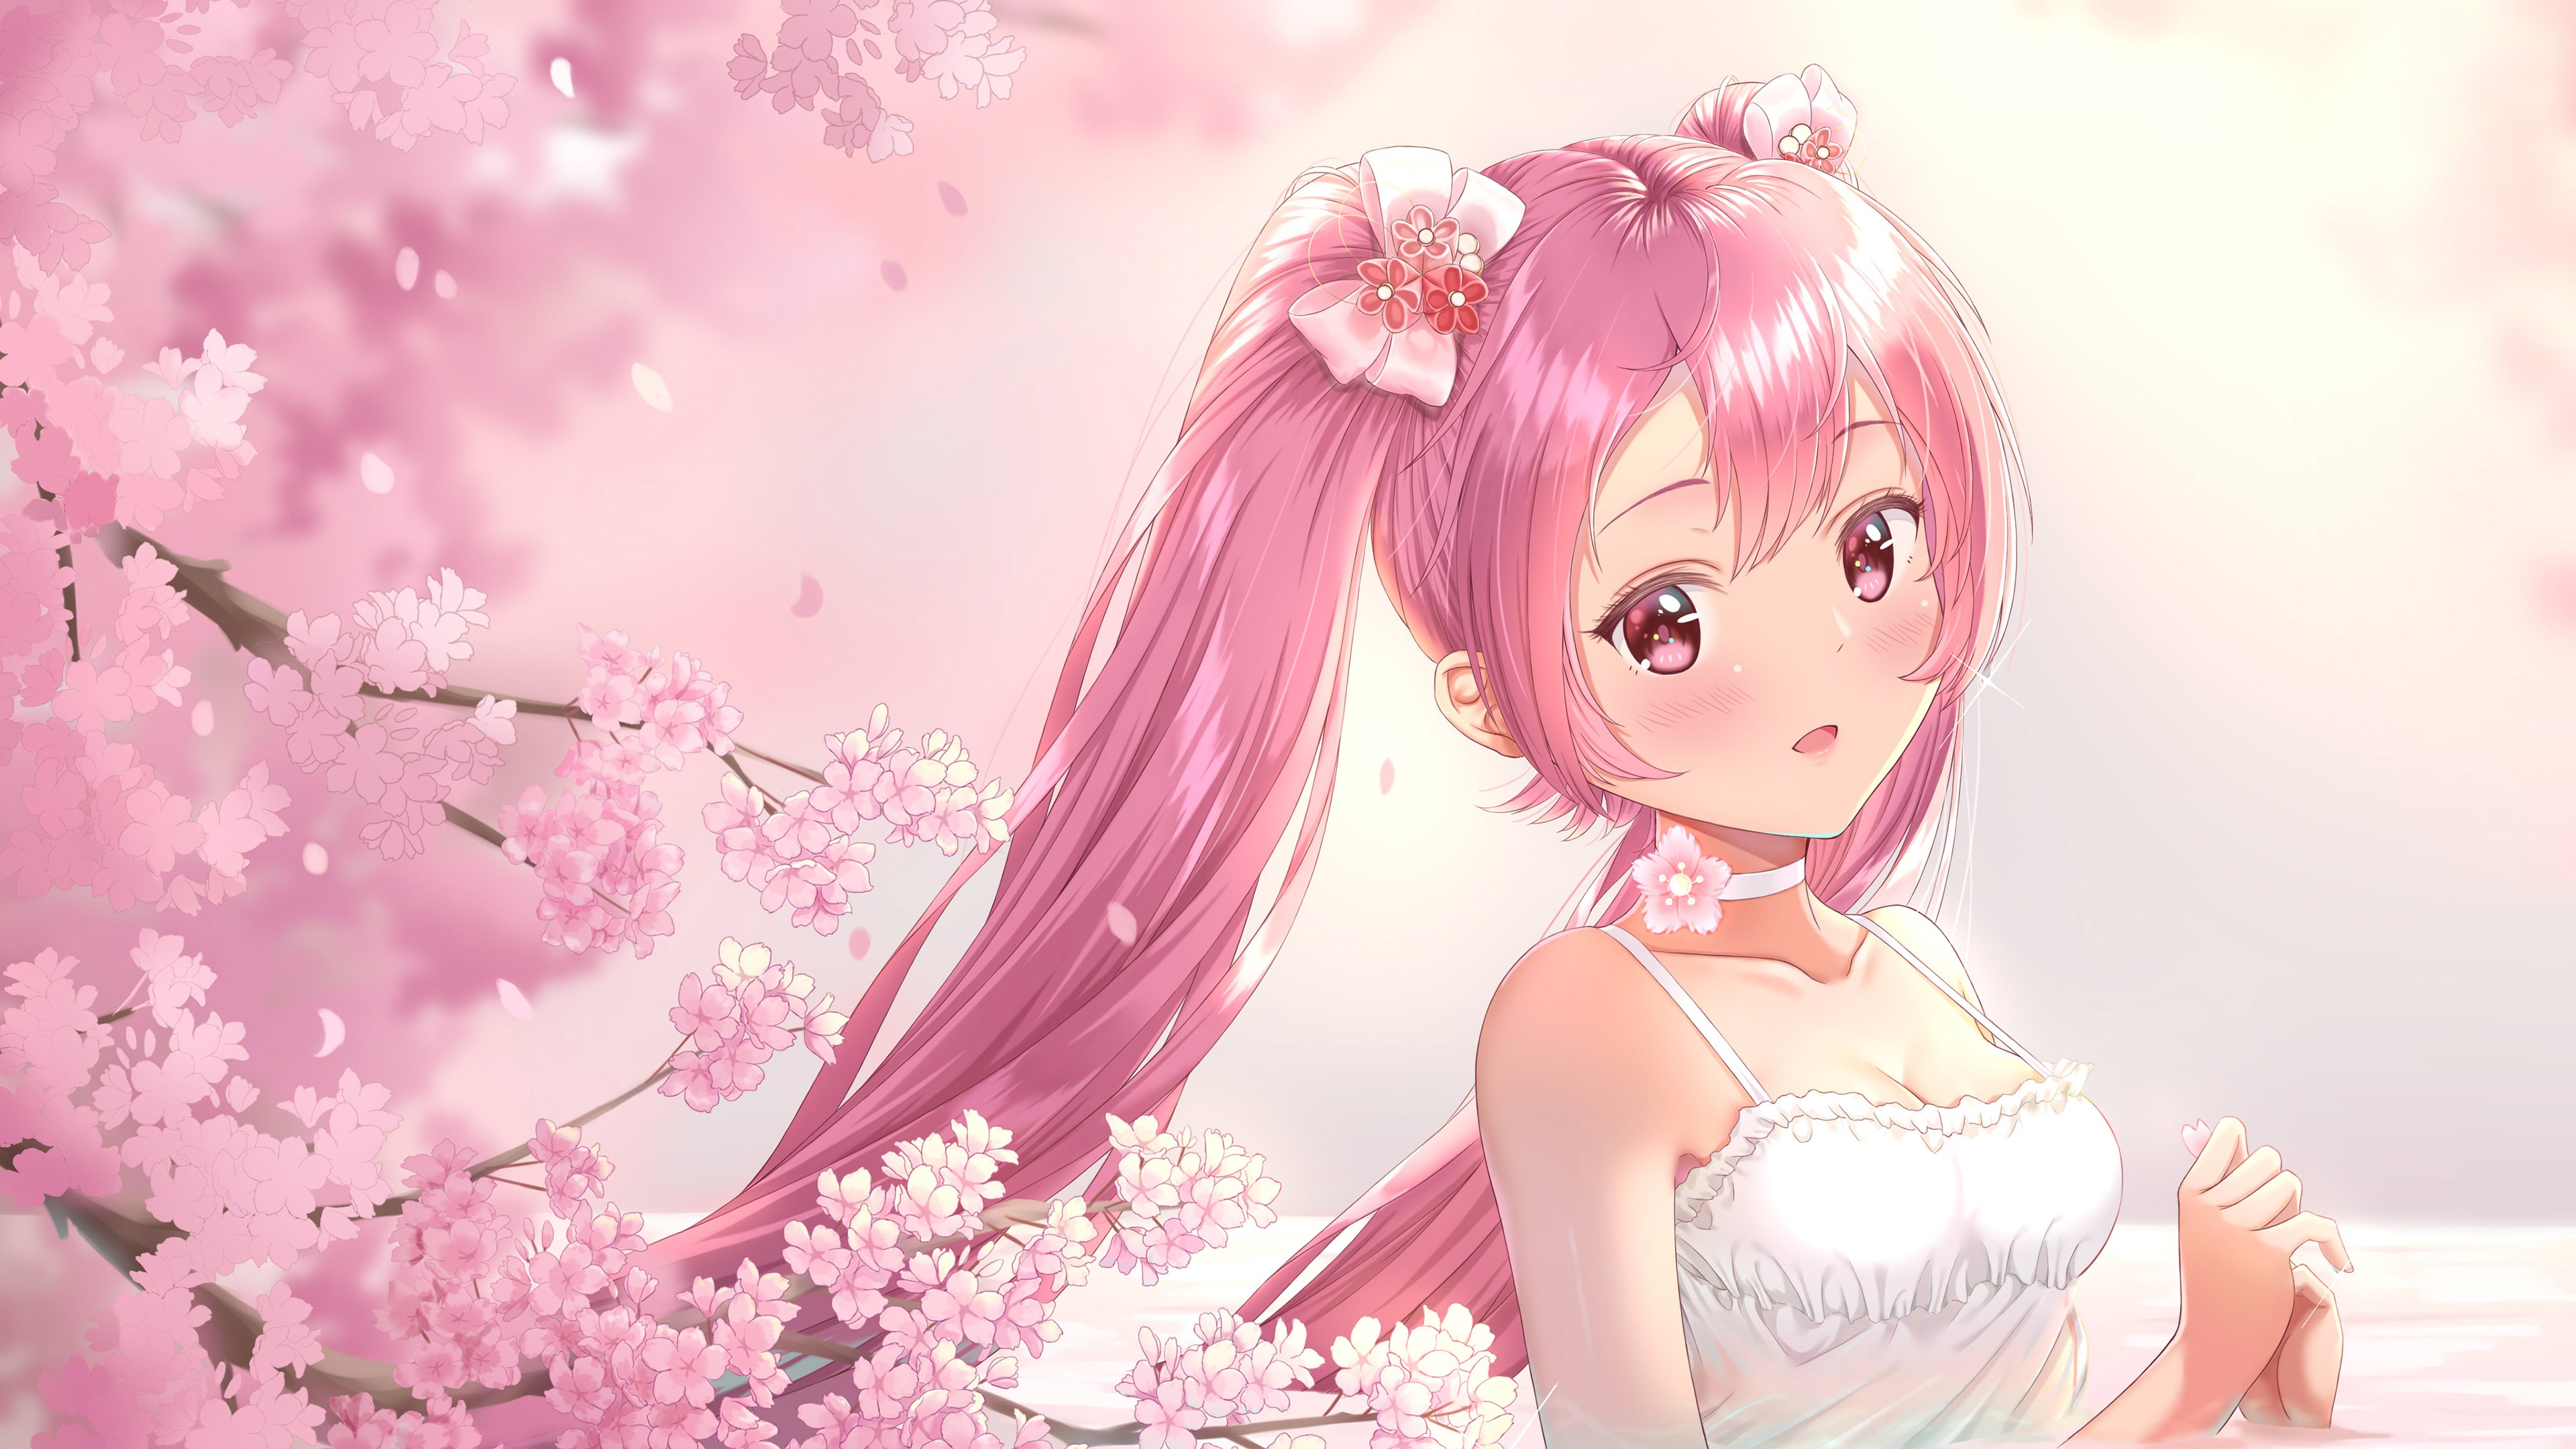 Anime girl with pink hair in a white dress Desktop wallpapers 640x480